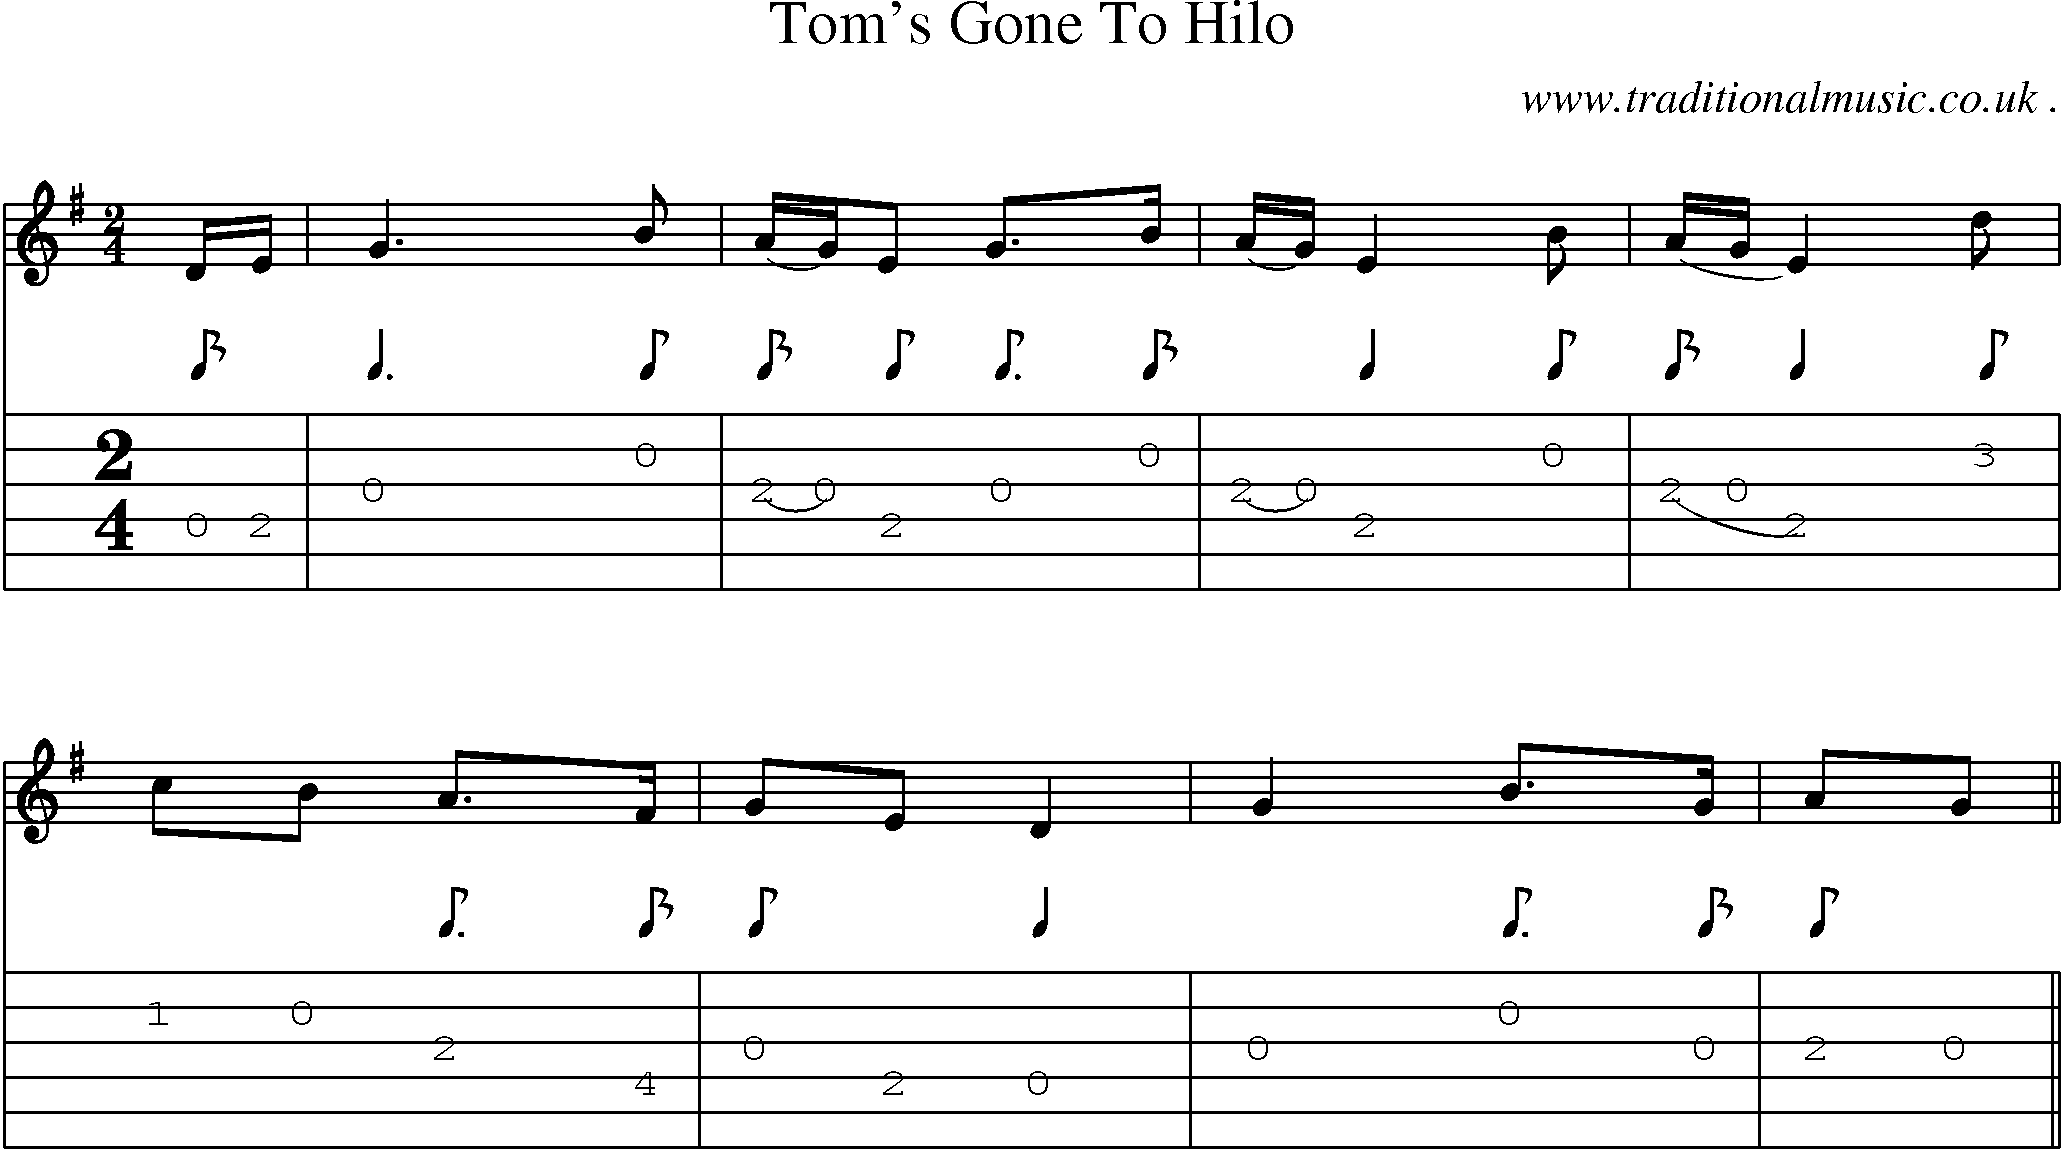 Sheet-Music and Guitar Tabs for Toms Gone To Hilo